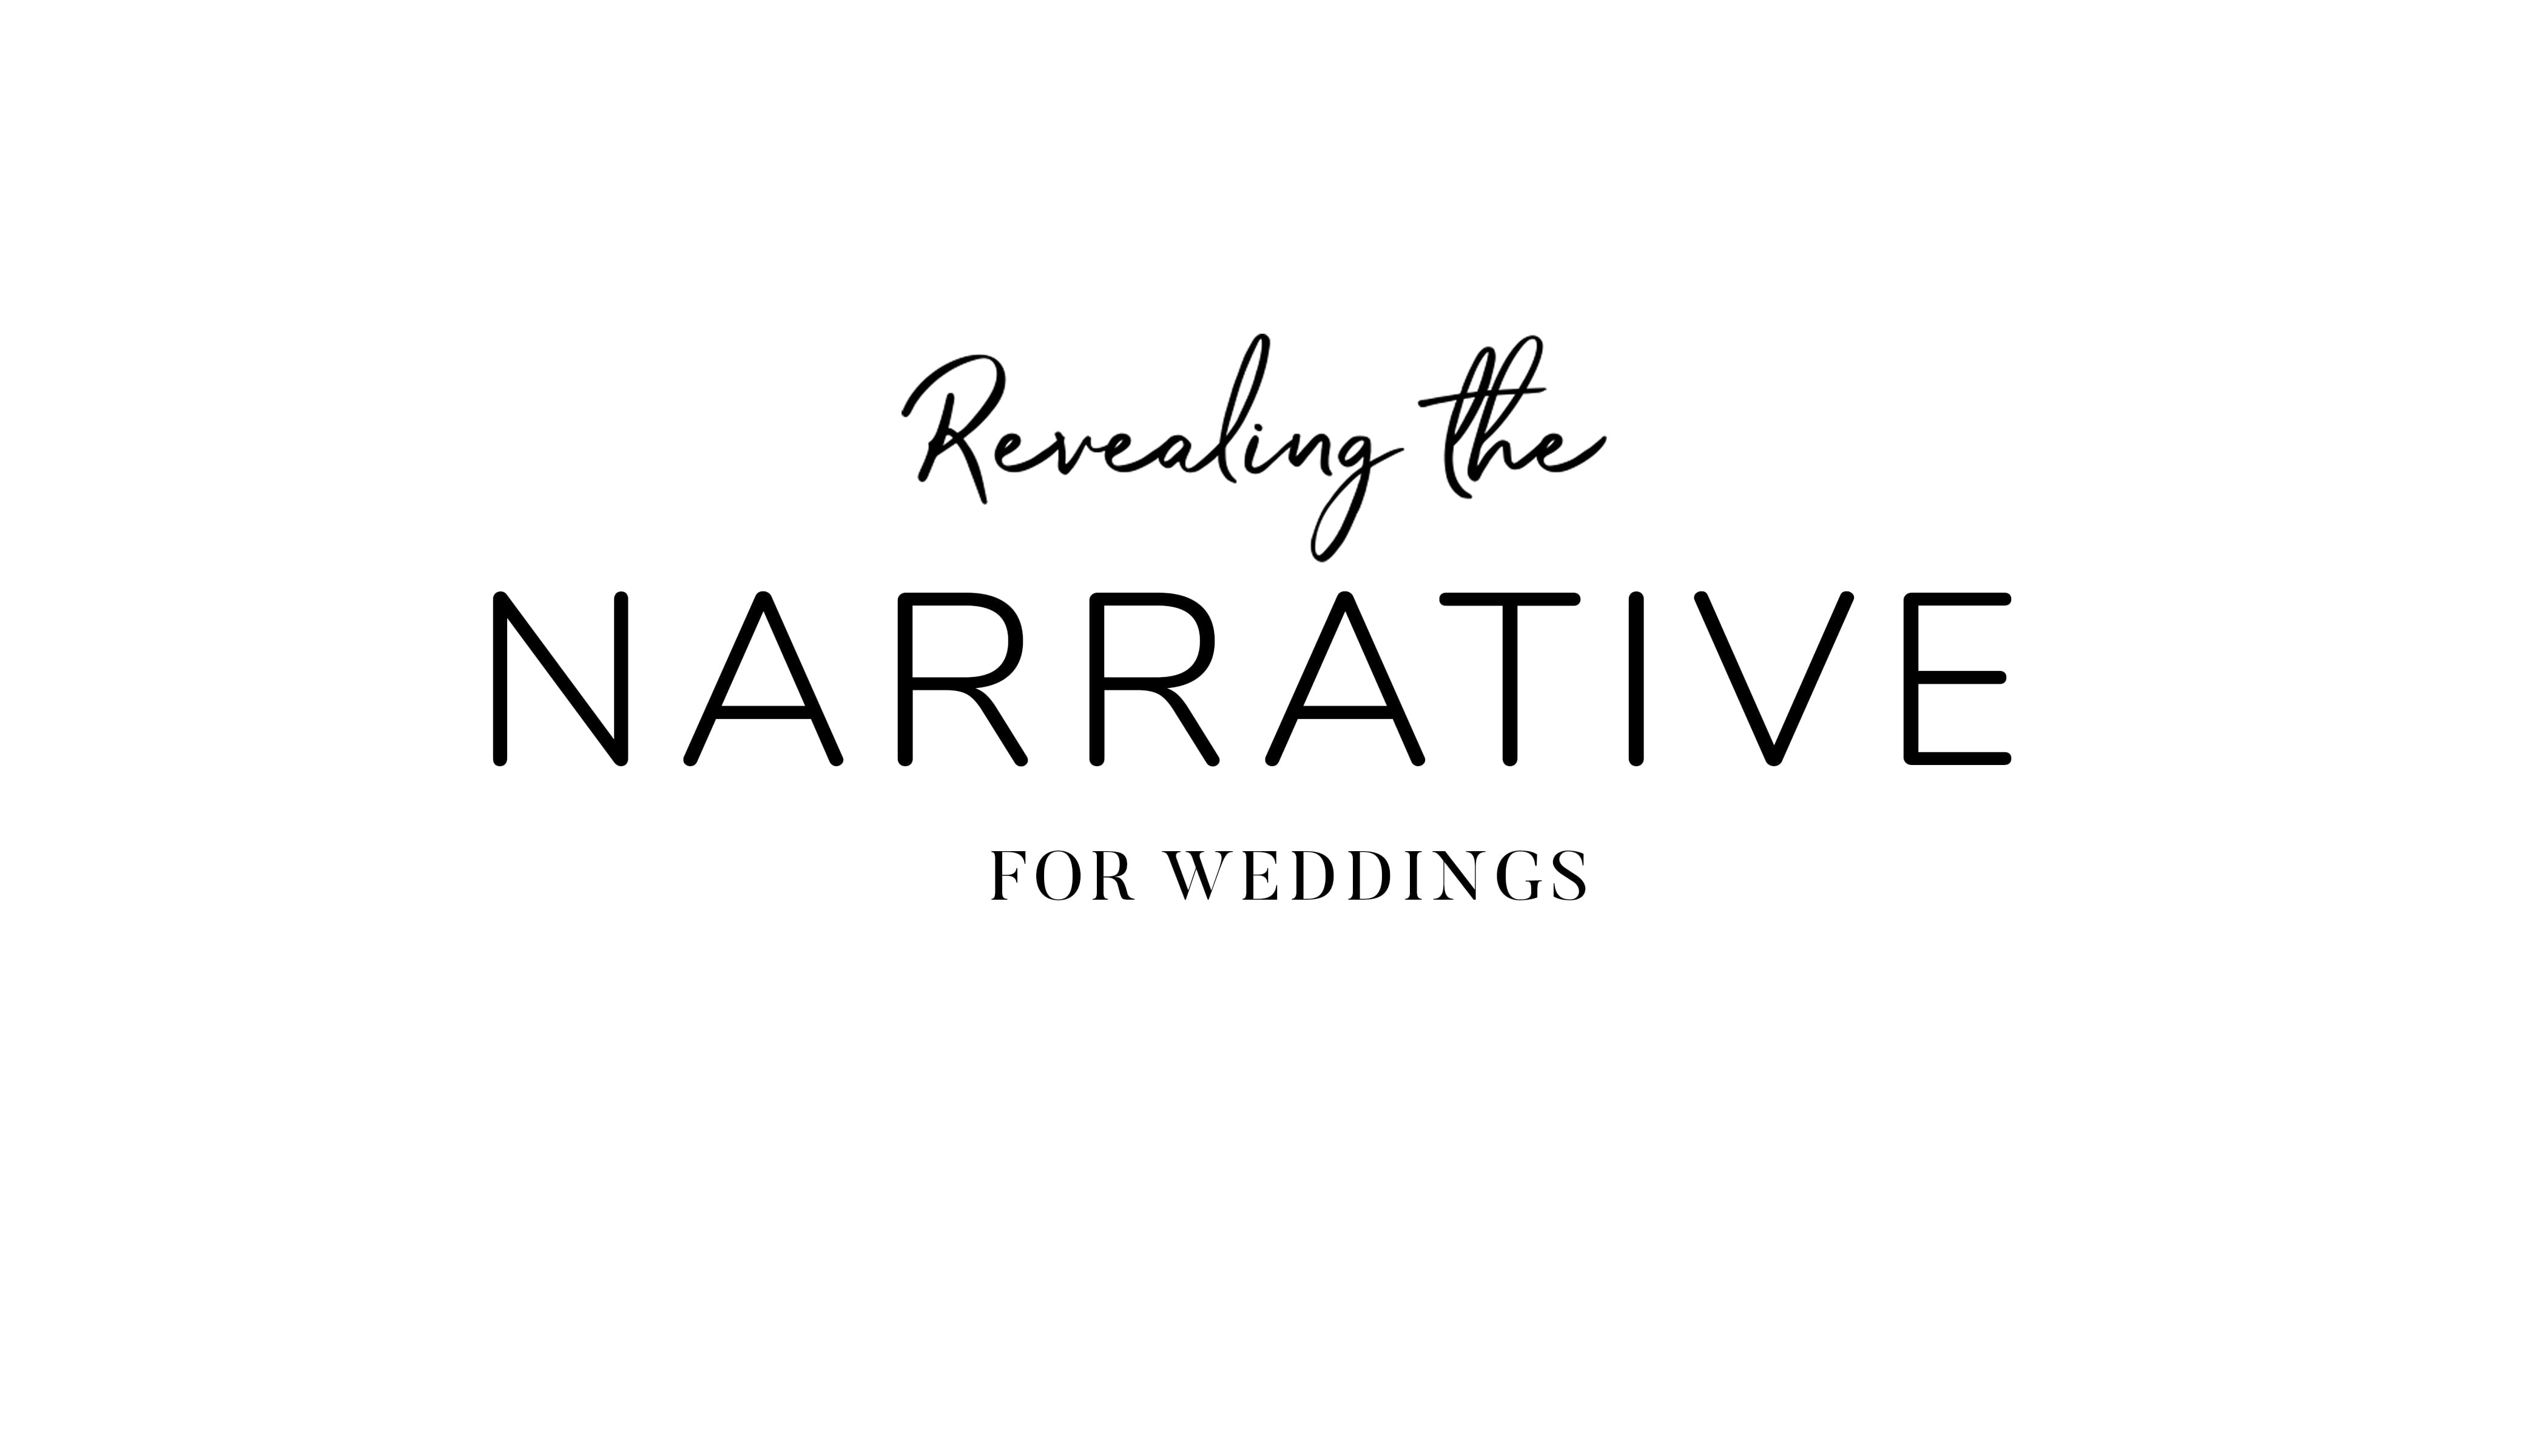 Comprehensive documentary wedding photography course